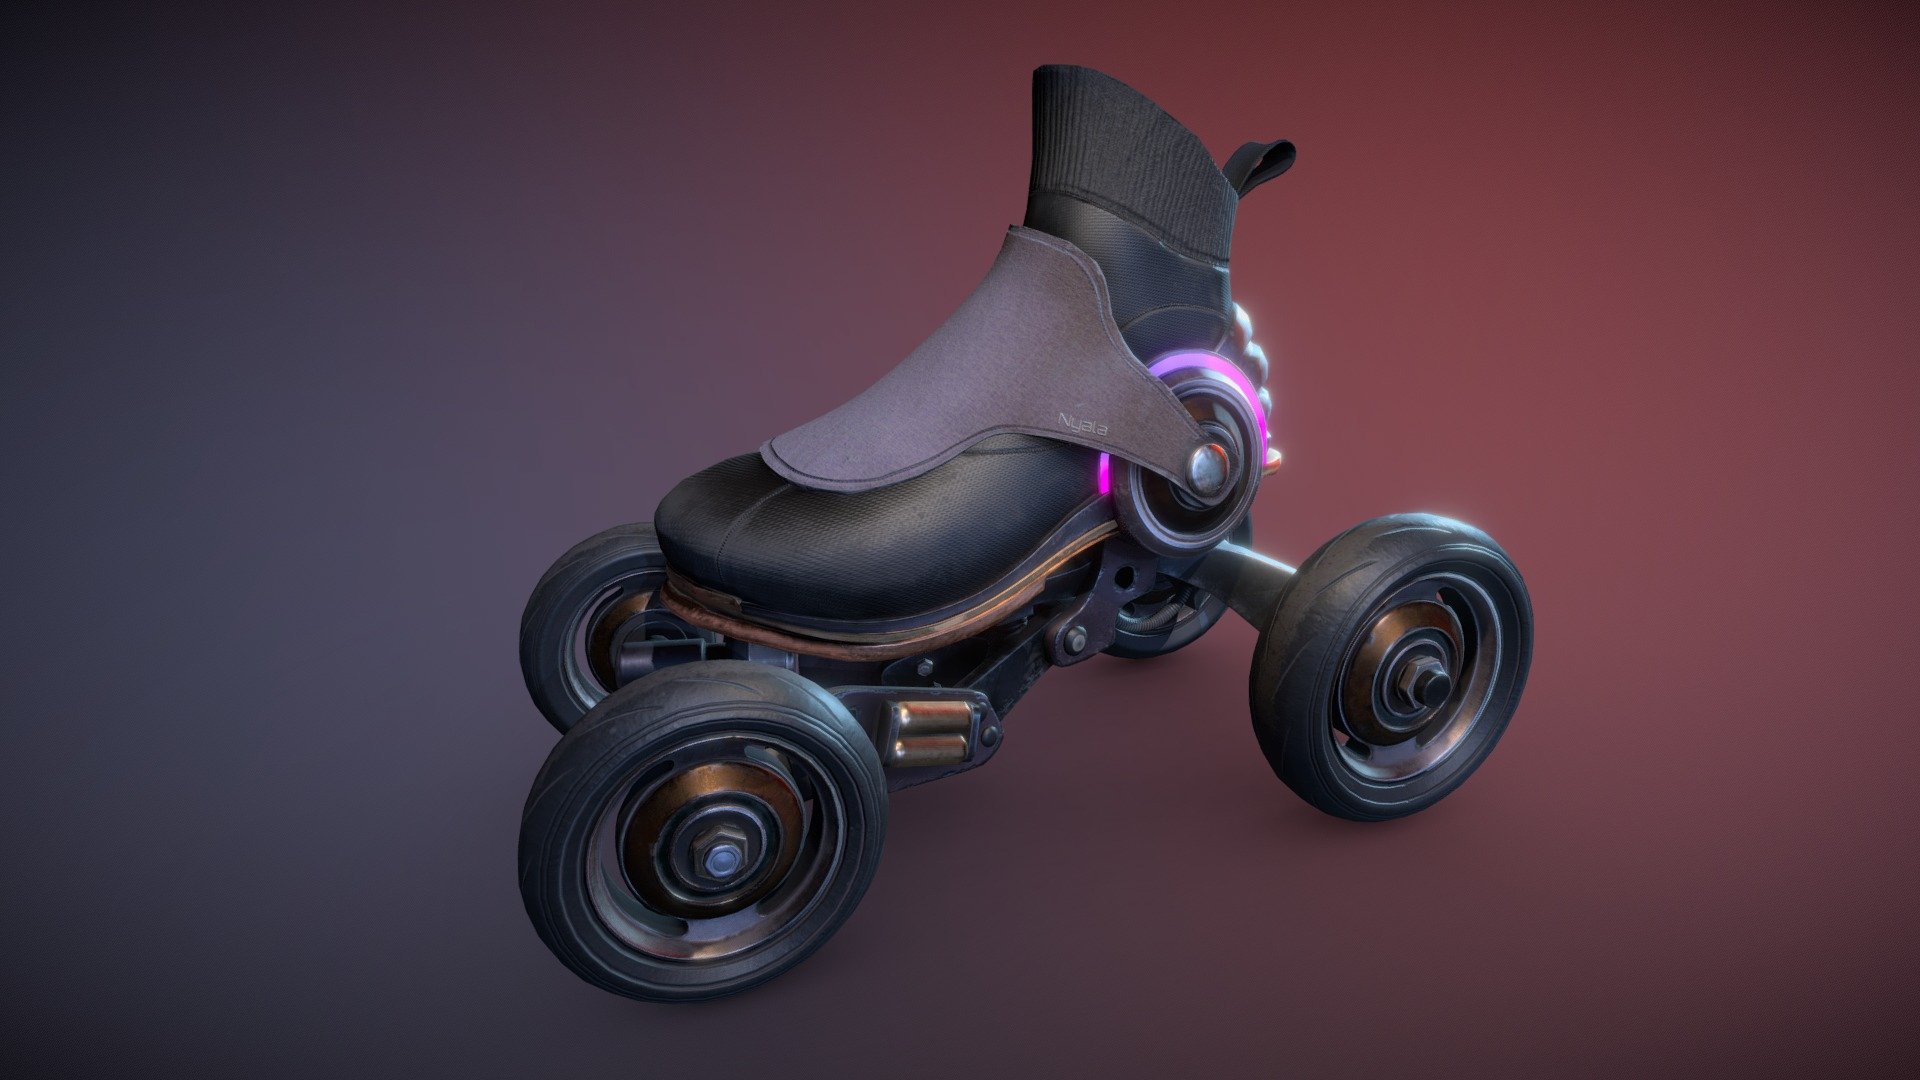 My final assignment for Game Asset Pipeline, I decided to make something that fits my interests, so I designed and made this futuristic rollerskate! 

Concept by me, modeled in 3ds Max and zBrush, textured in Substance painter 3d model